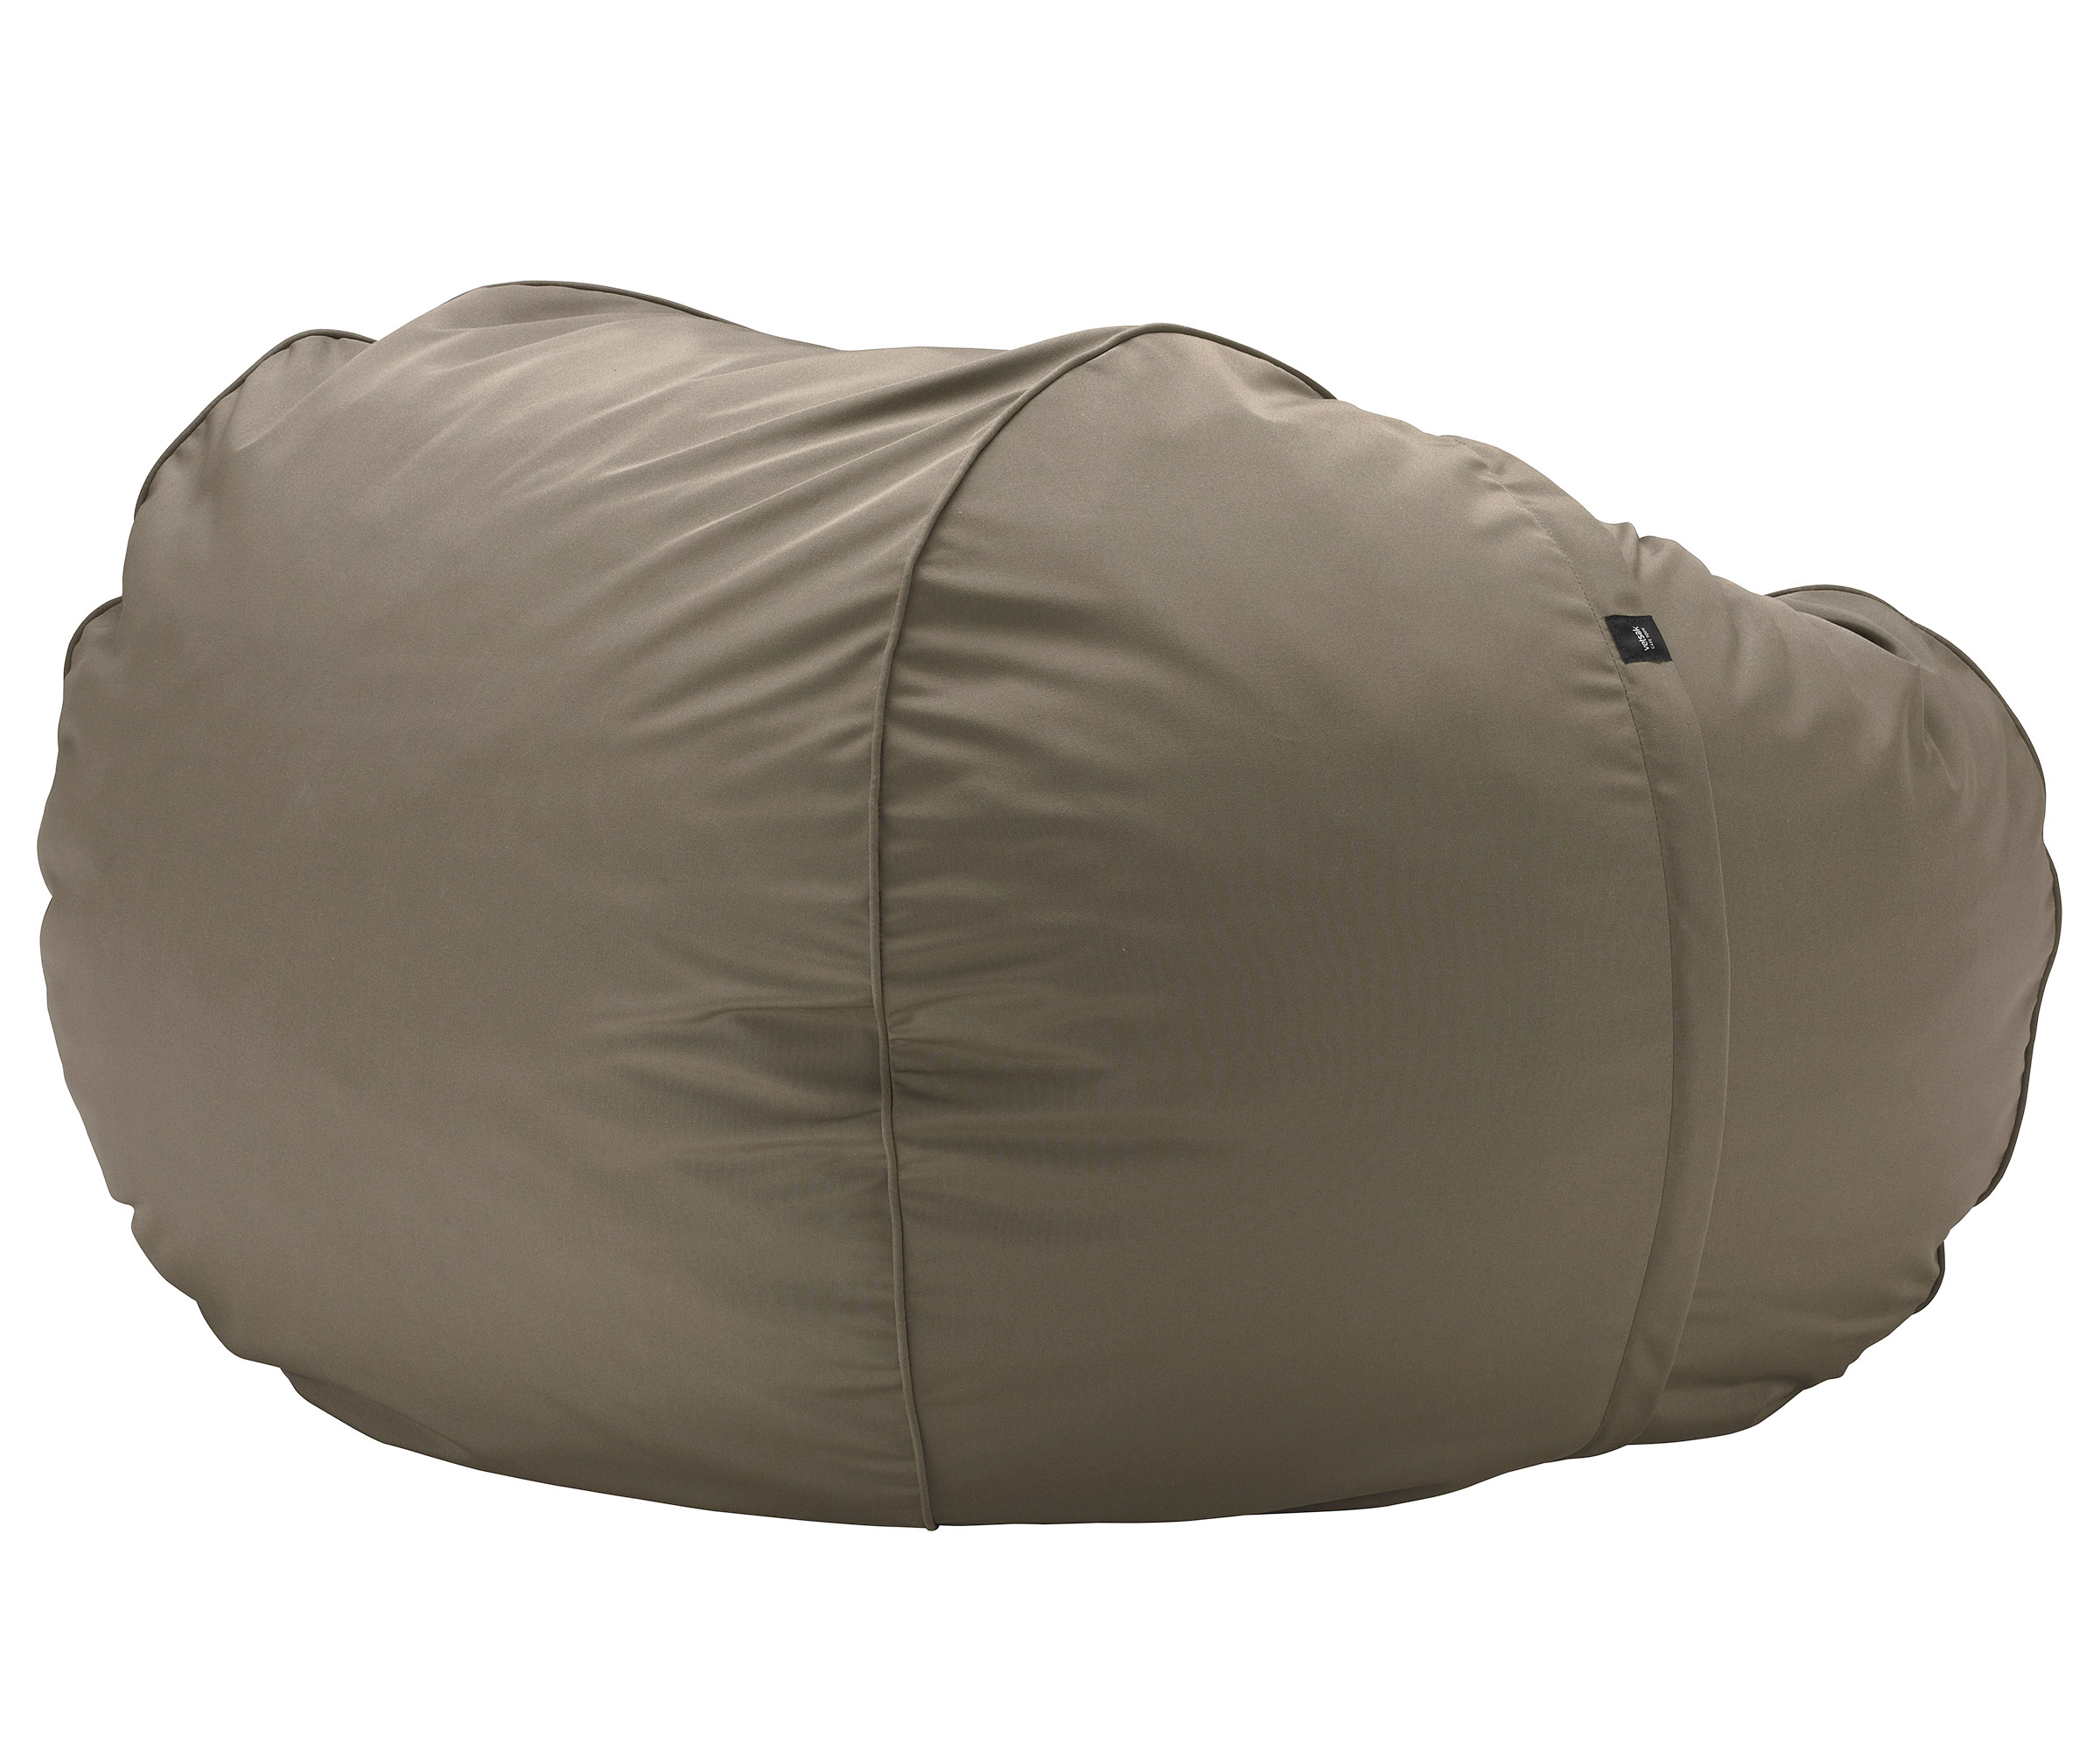  Beanbag Large Outdoor stone